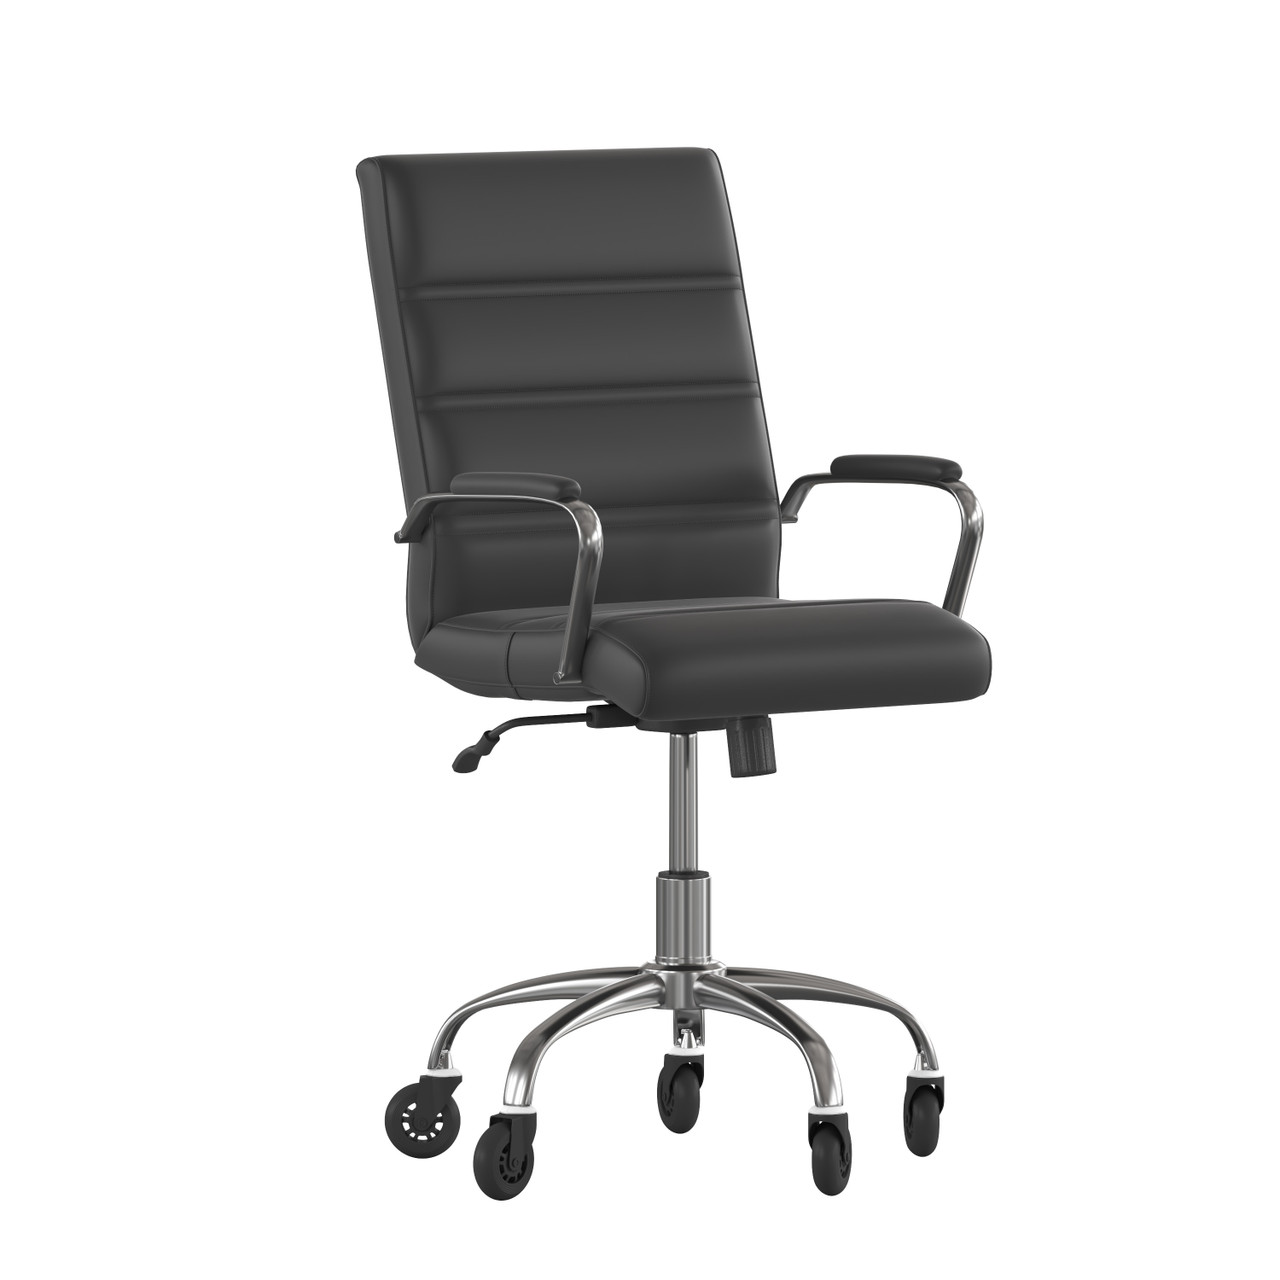 Flash Furniture Camilia Mid-Back Black LeatherSoft Executive Swivel Office Chair w/ Chrome Frame, Arms, & Transparent Roller Wheels, Model#